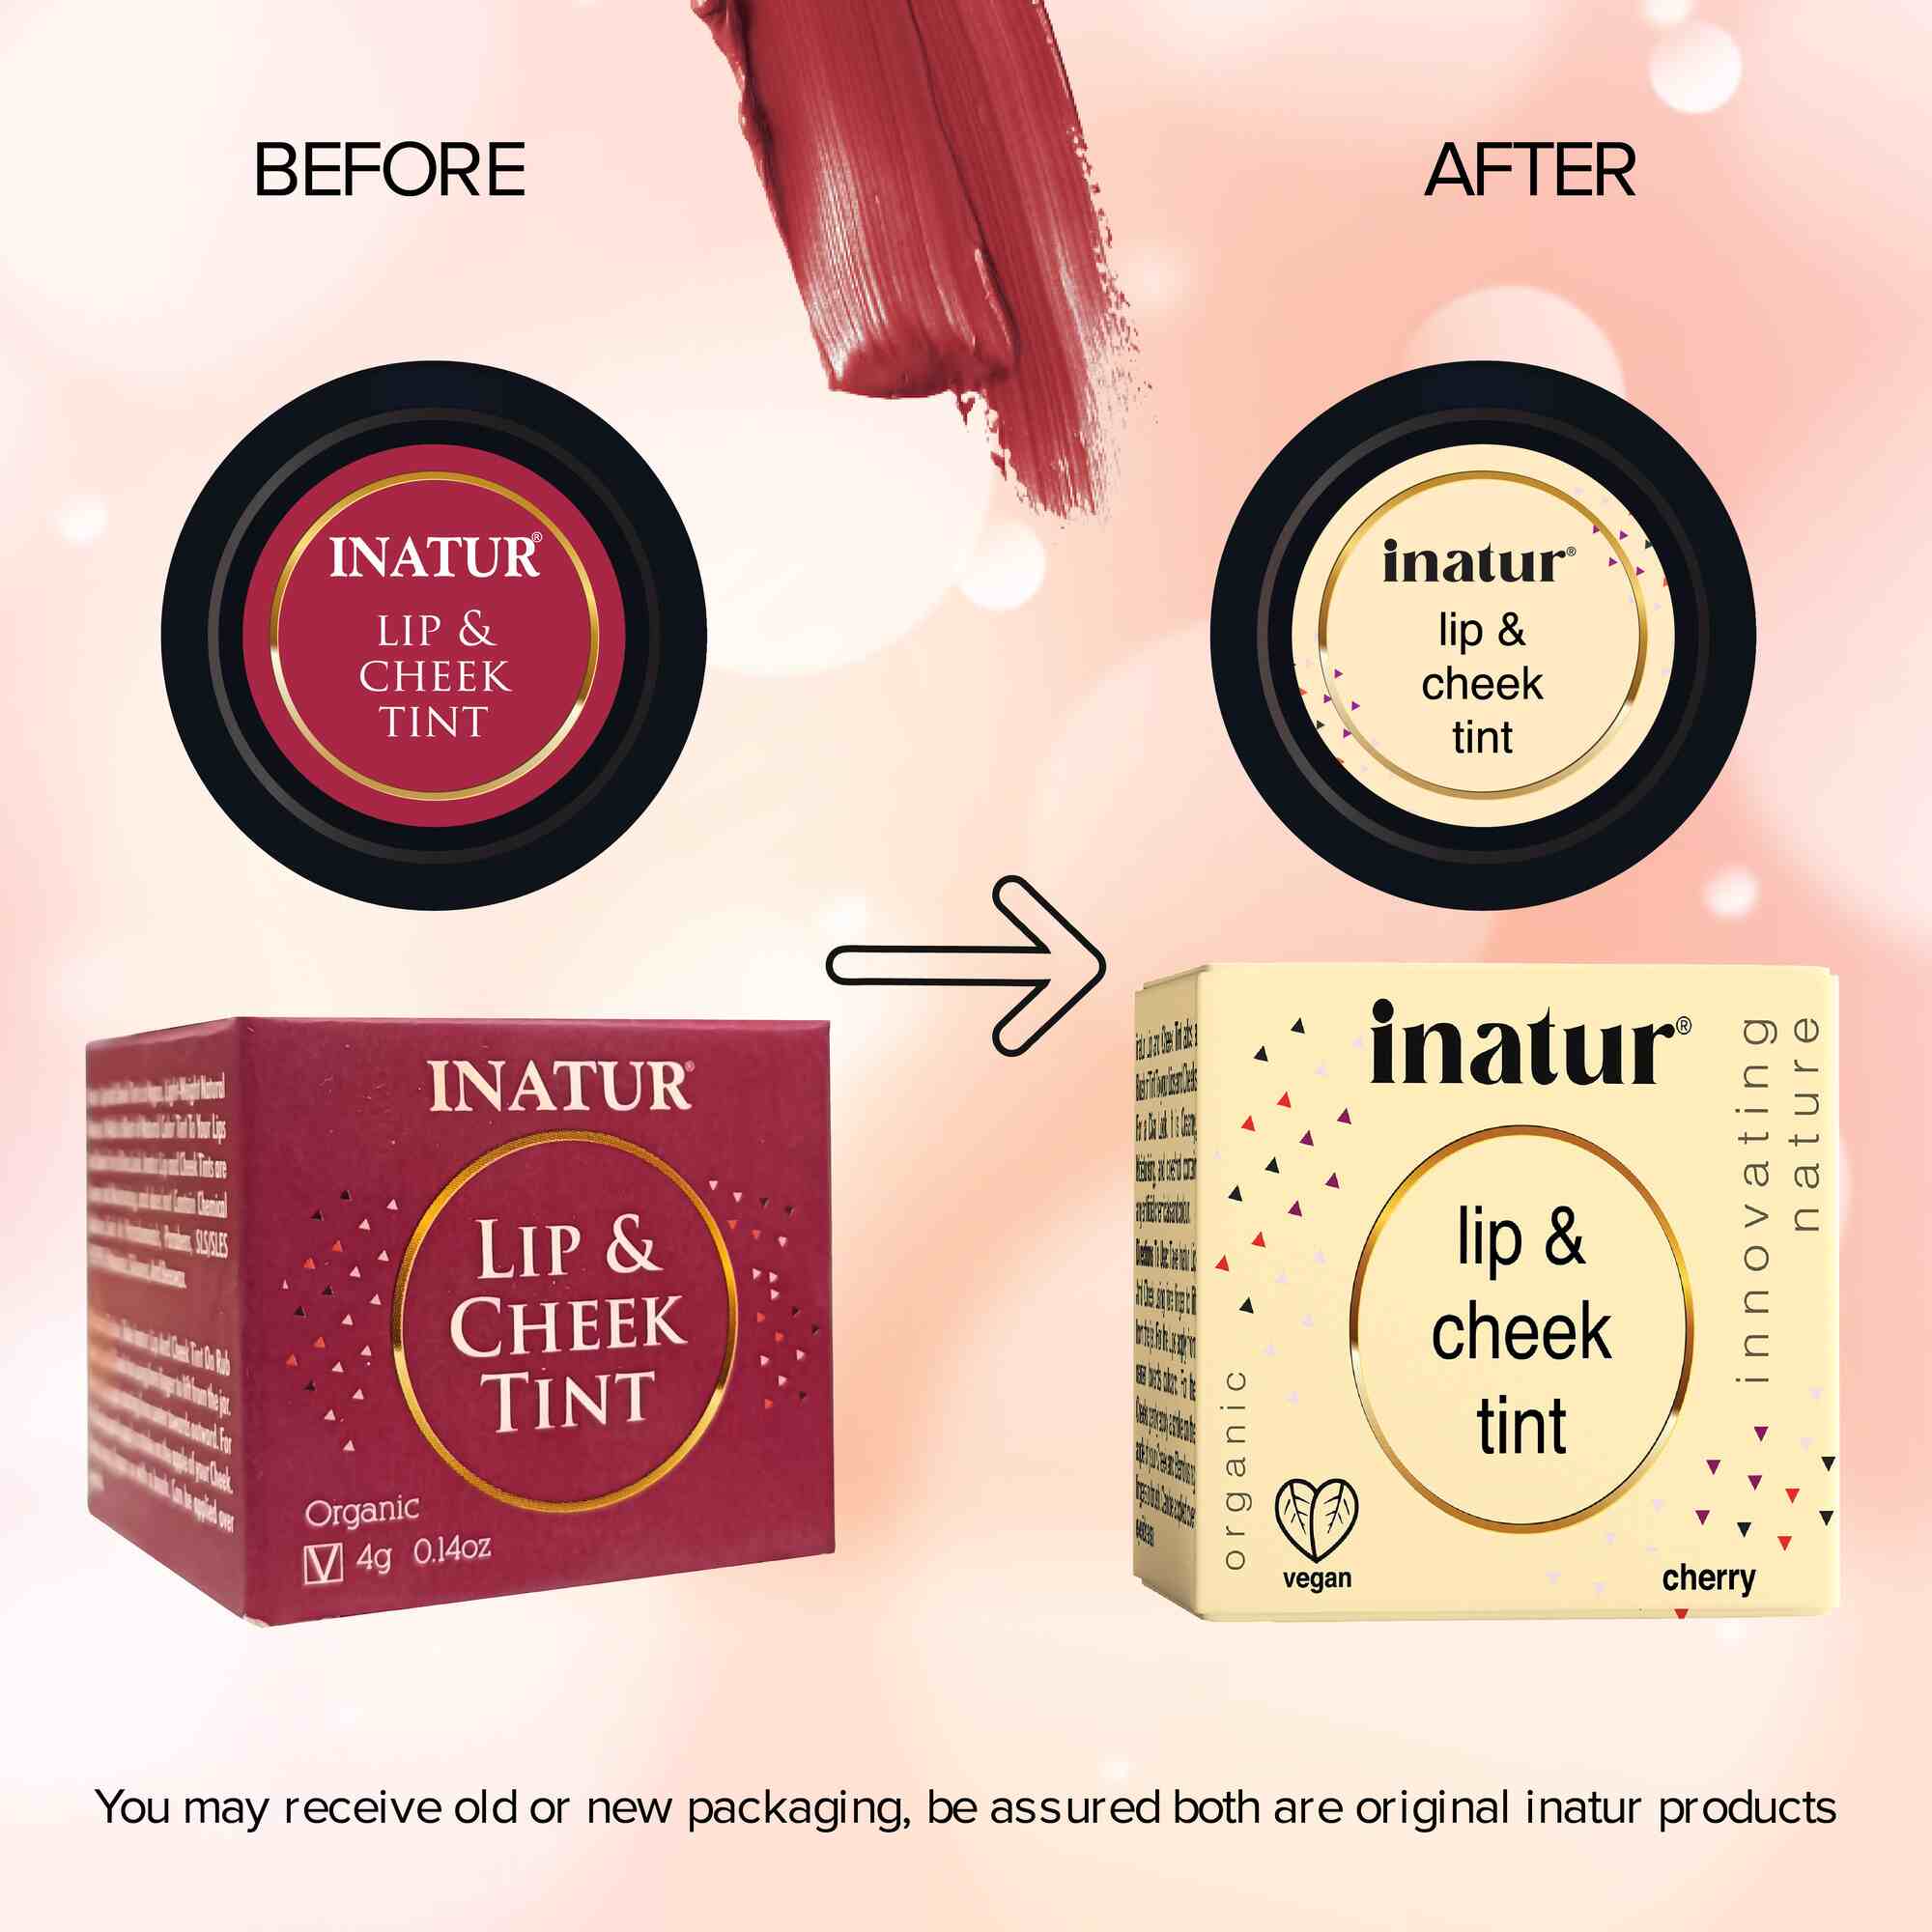 inatur lip cheek tint before and after